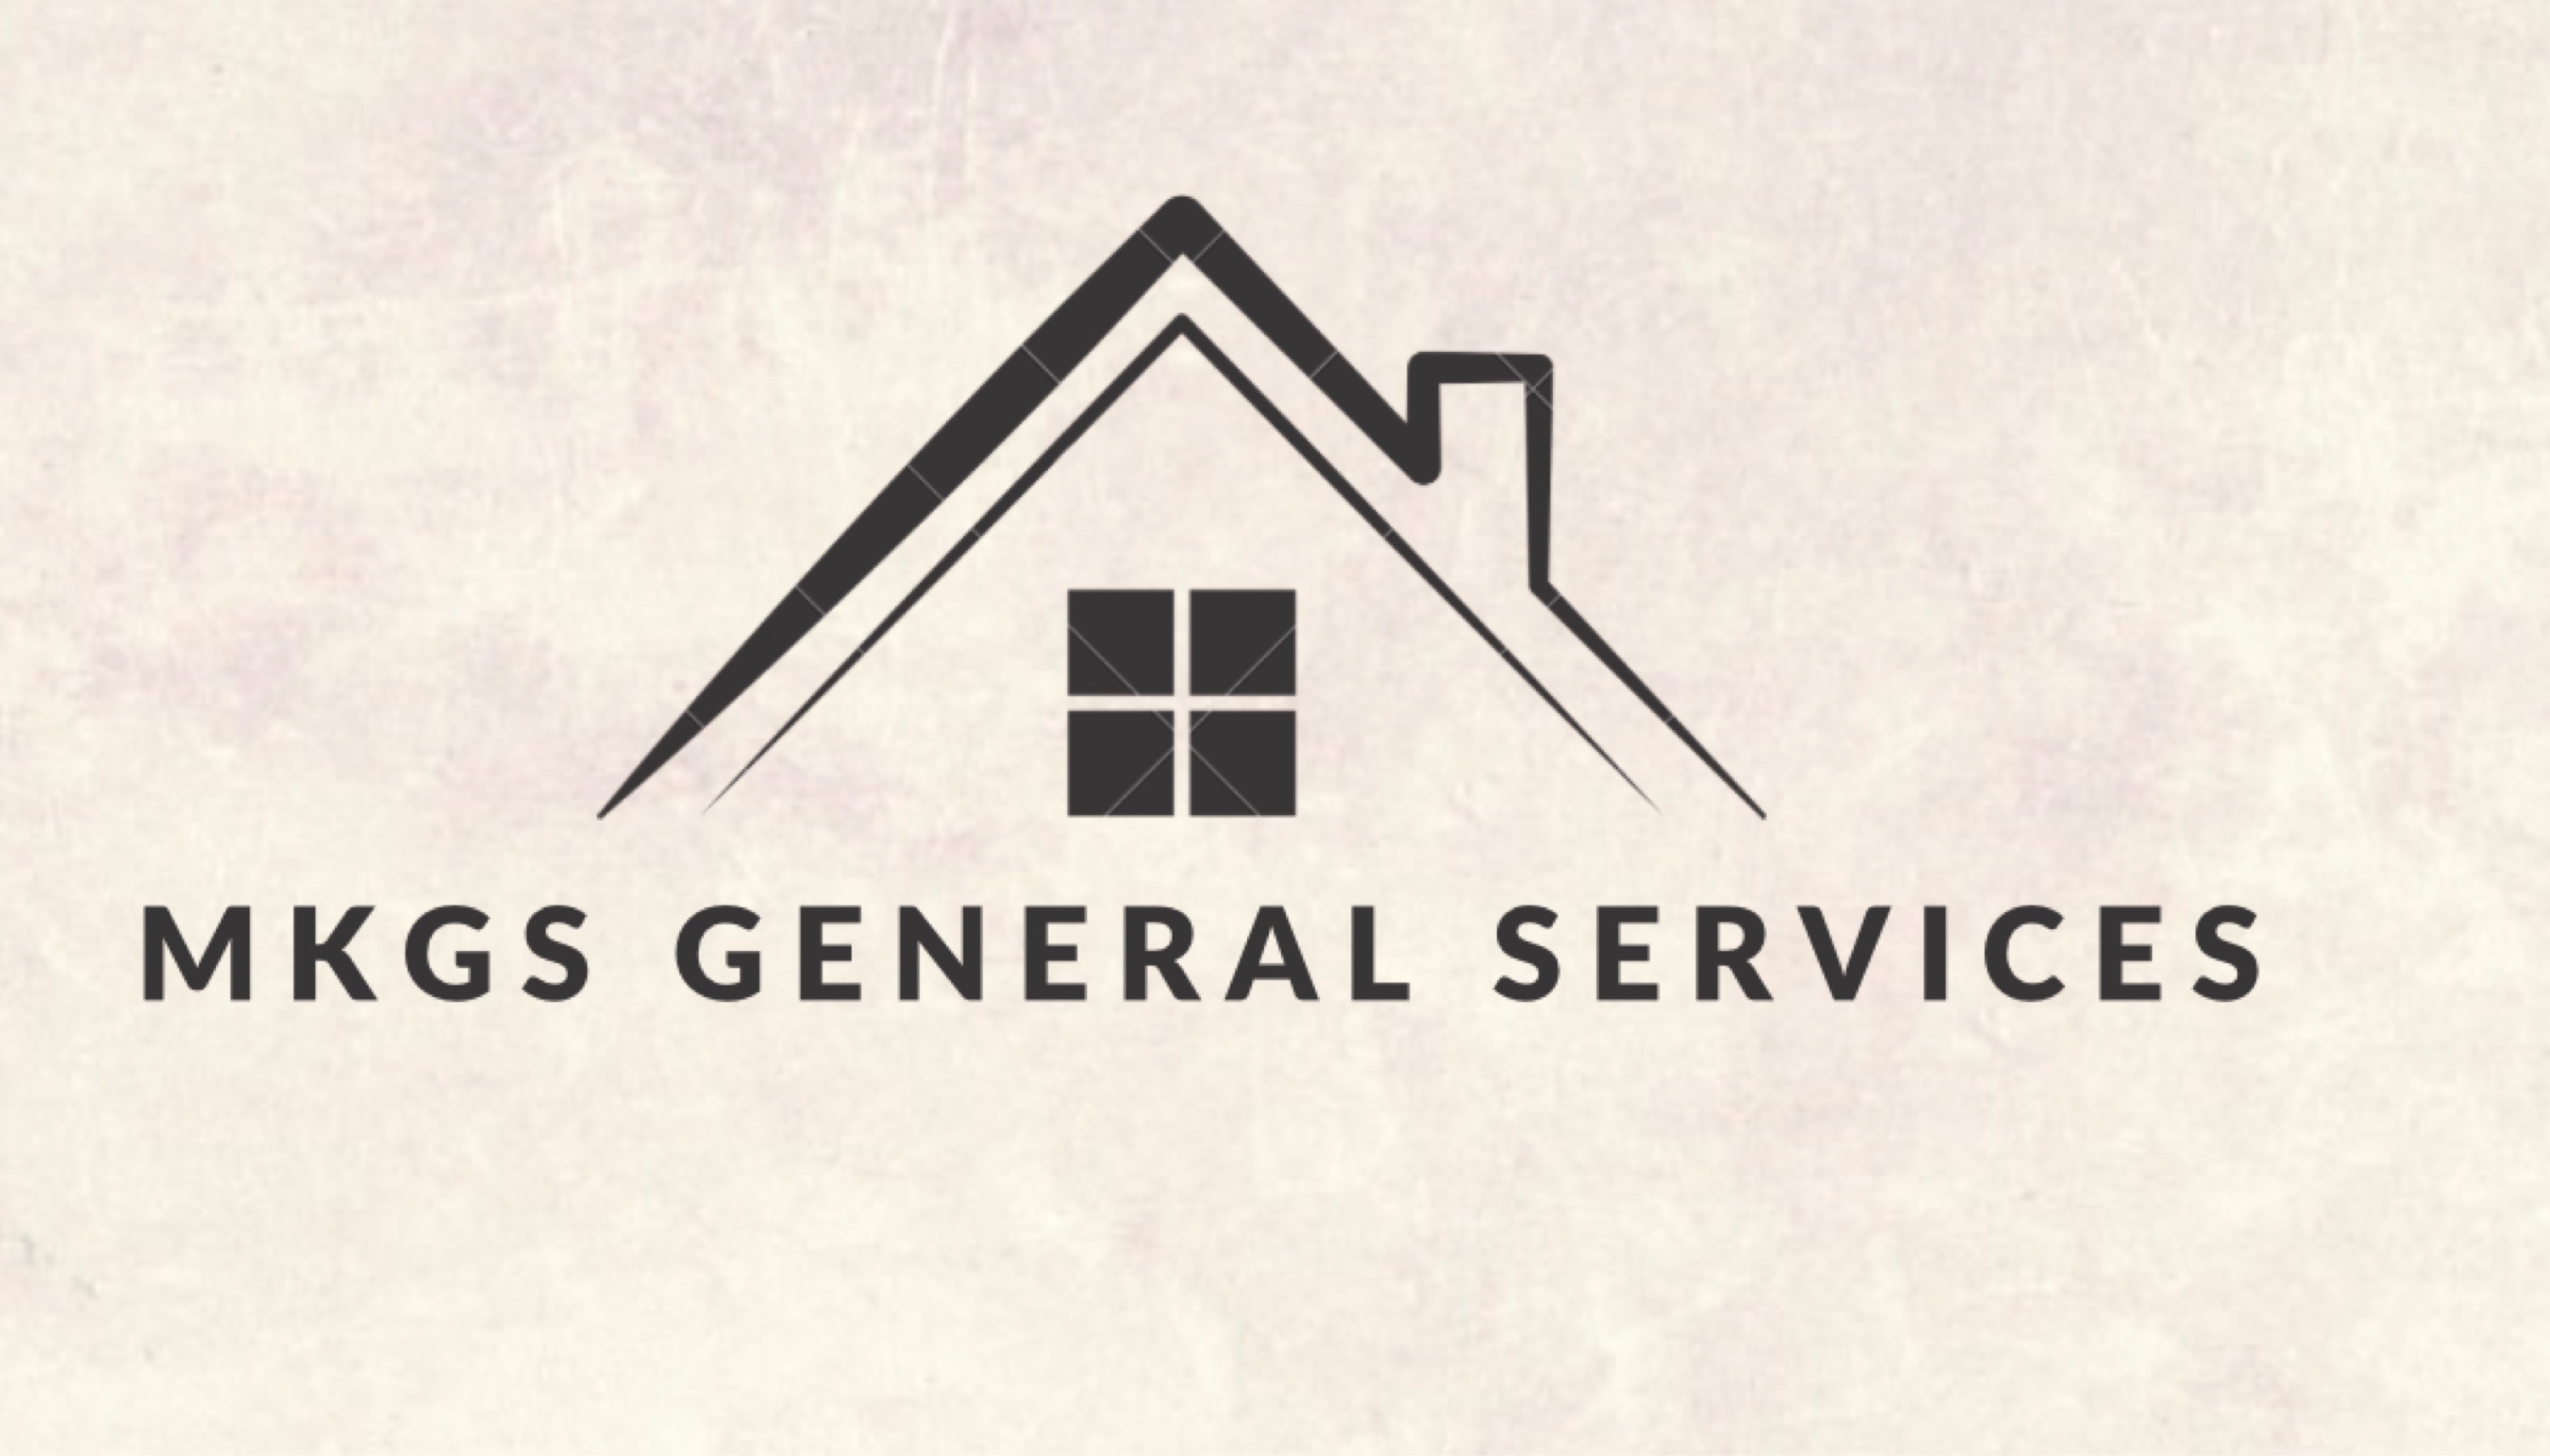 MKGS General Services Logo